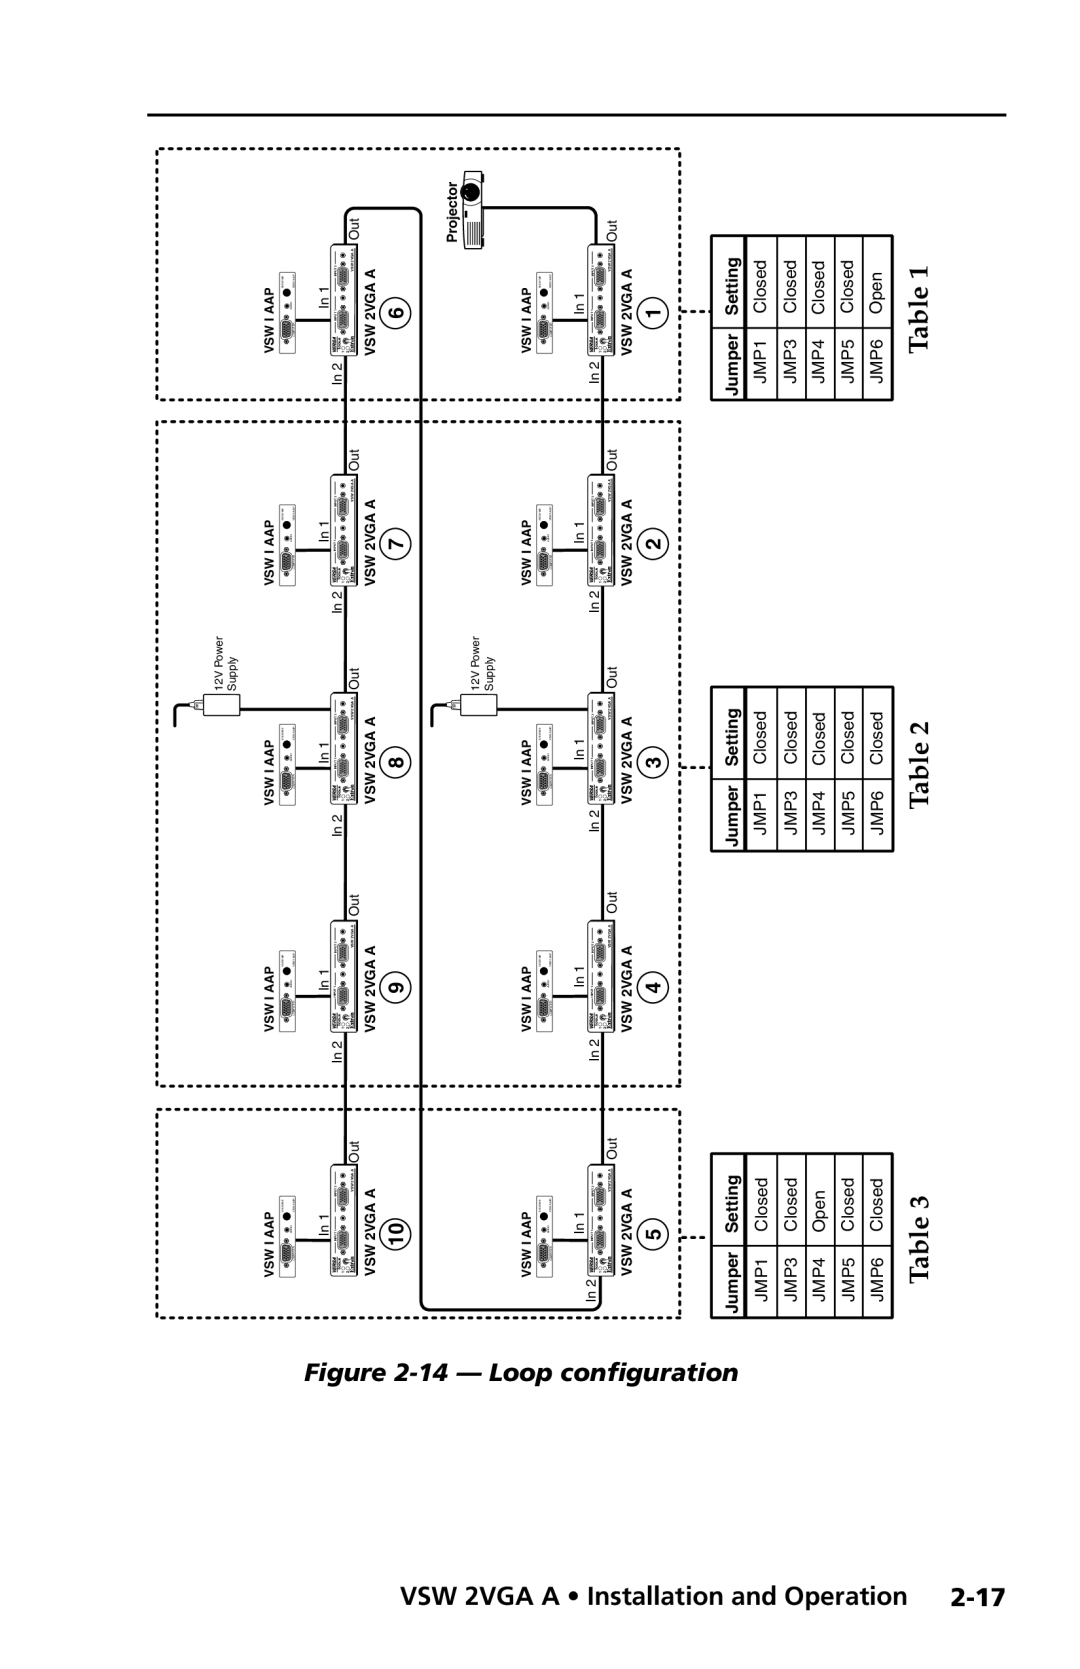 Extron electronic user manual 14 - Loop configuration, VSW 2VGA A Installation and Operation 